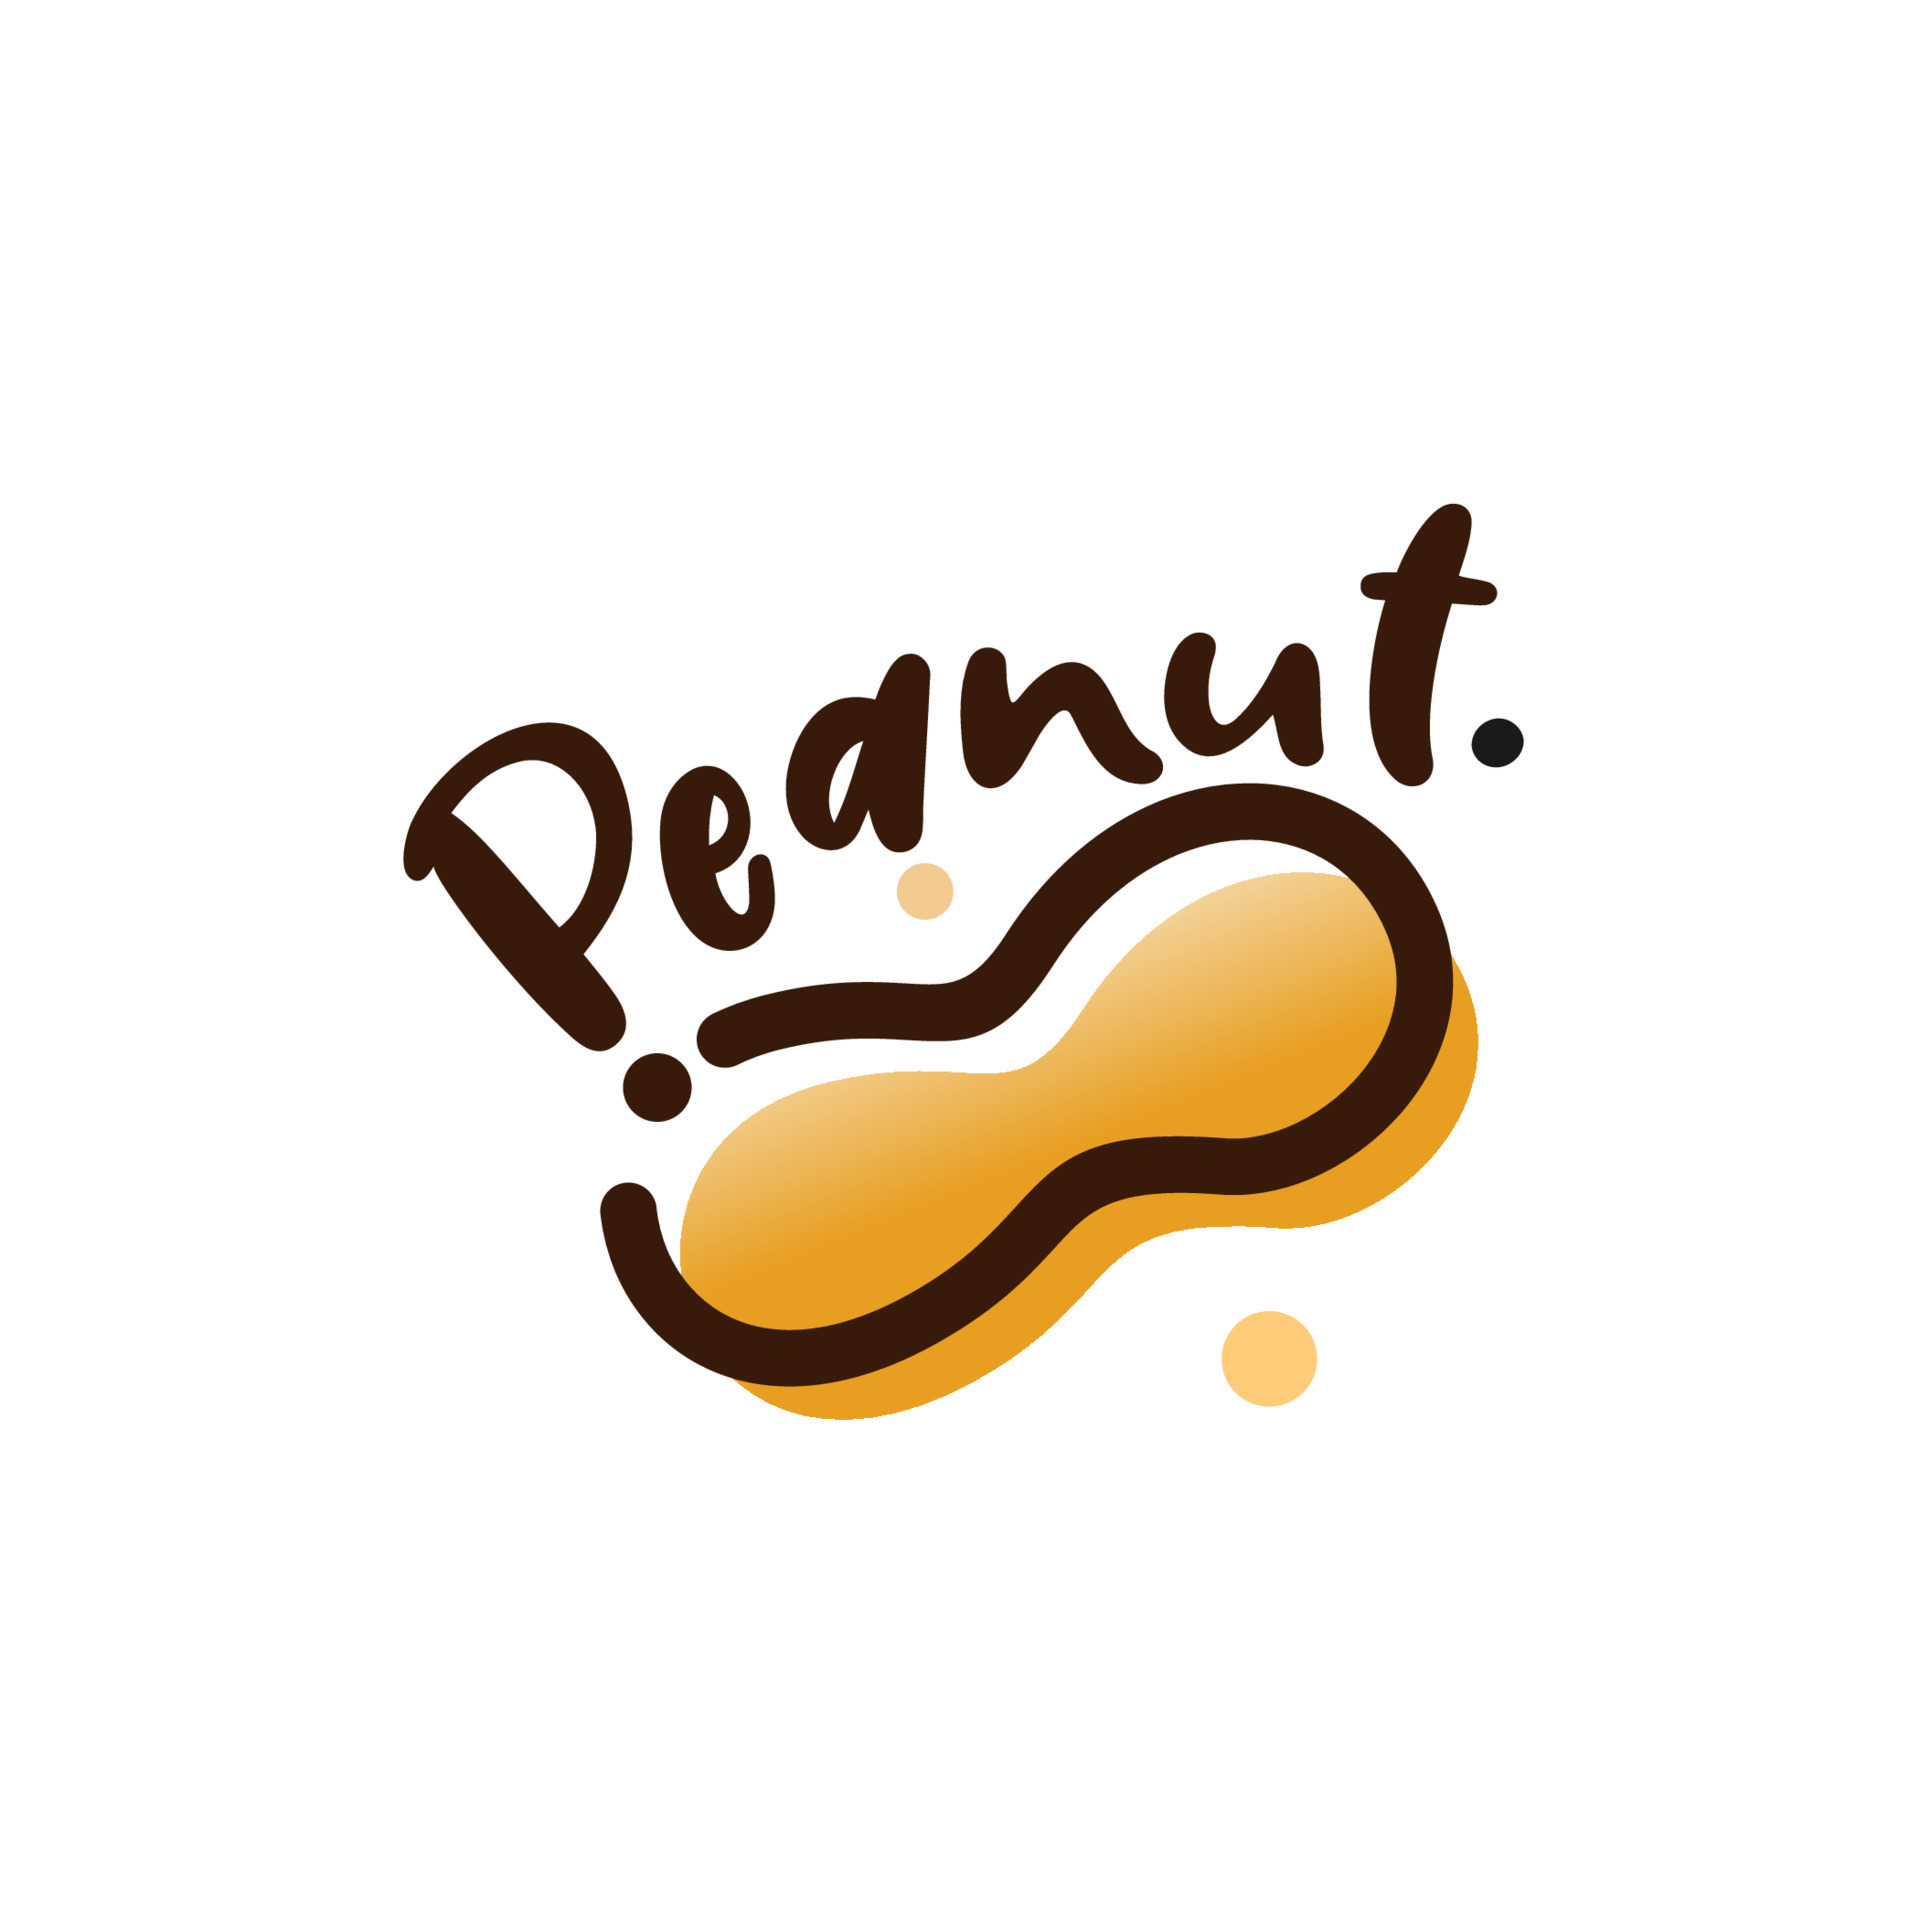 ABOUT PEANUT BUTTER